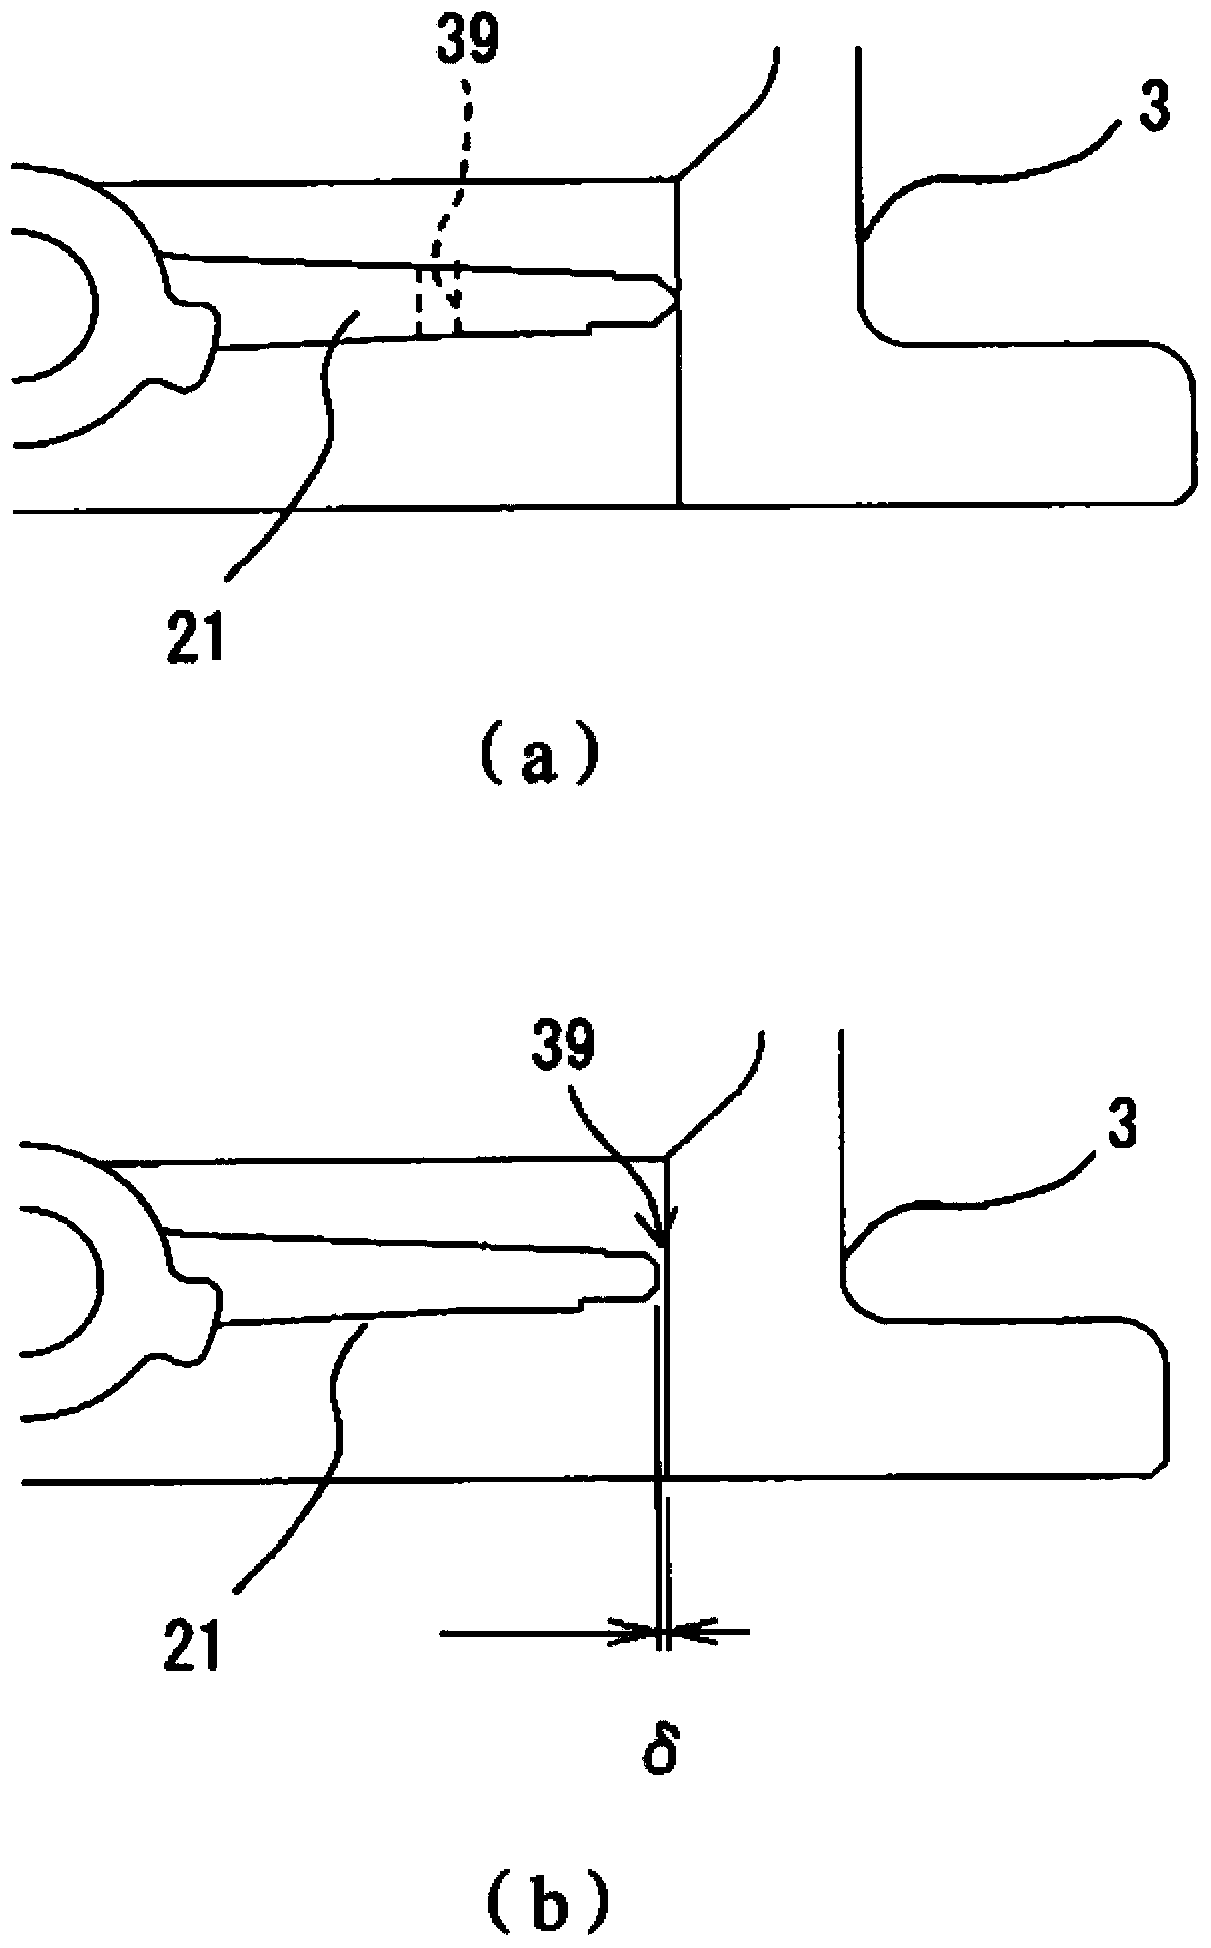 Absorption structure of compressor